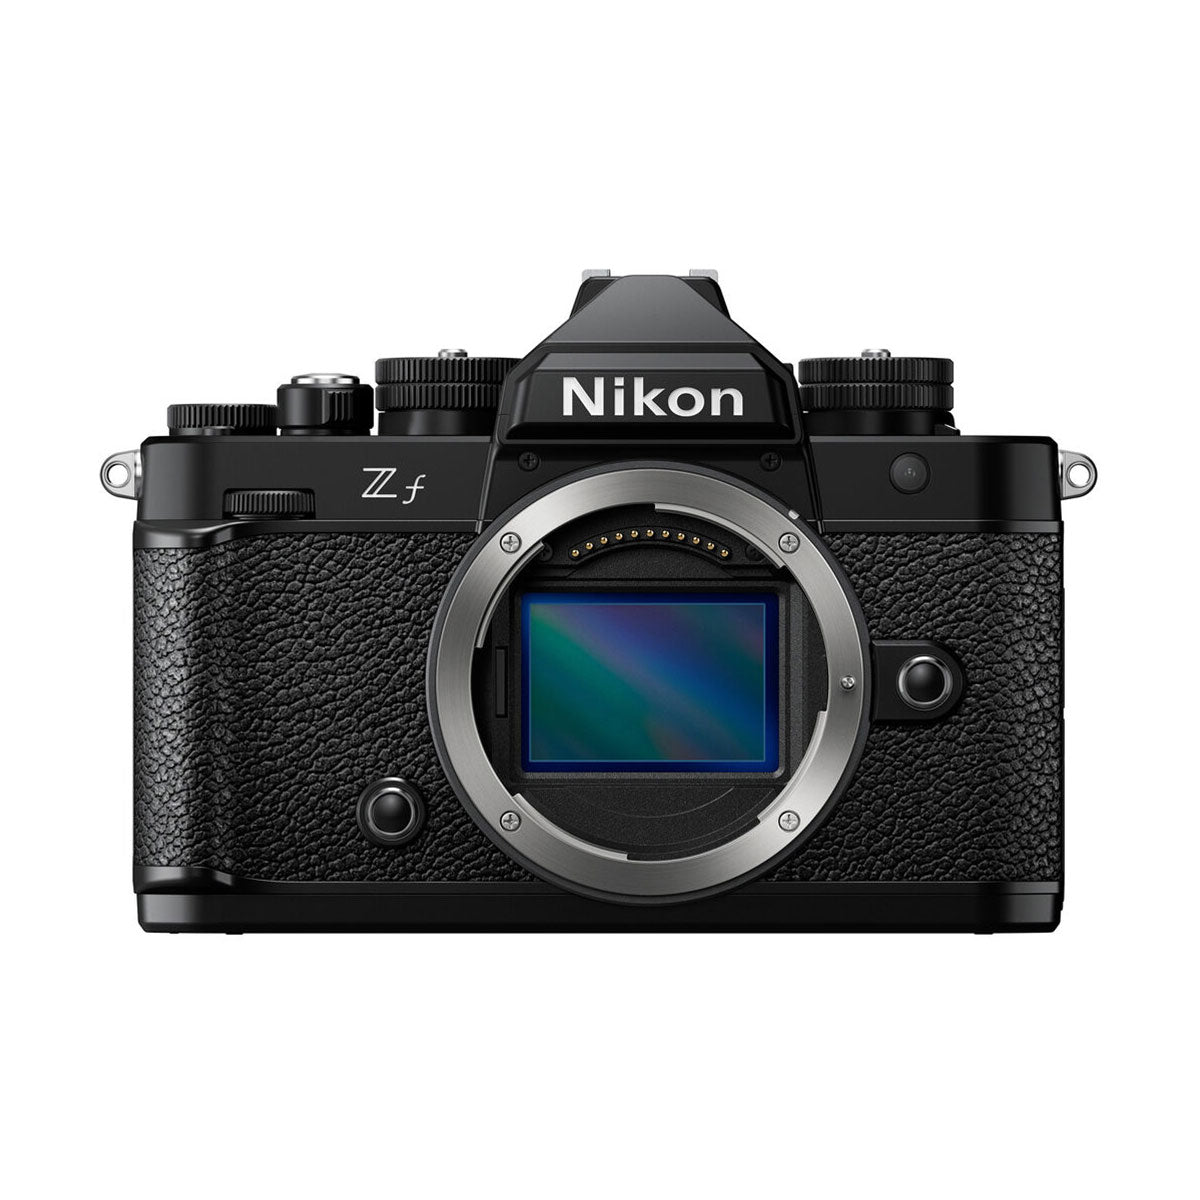 Nikon Zf Mirrorless Camera with Z 24-70mm f/4 S Lens